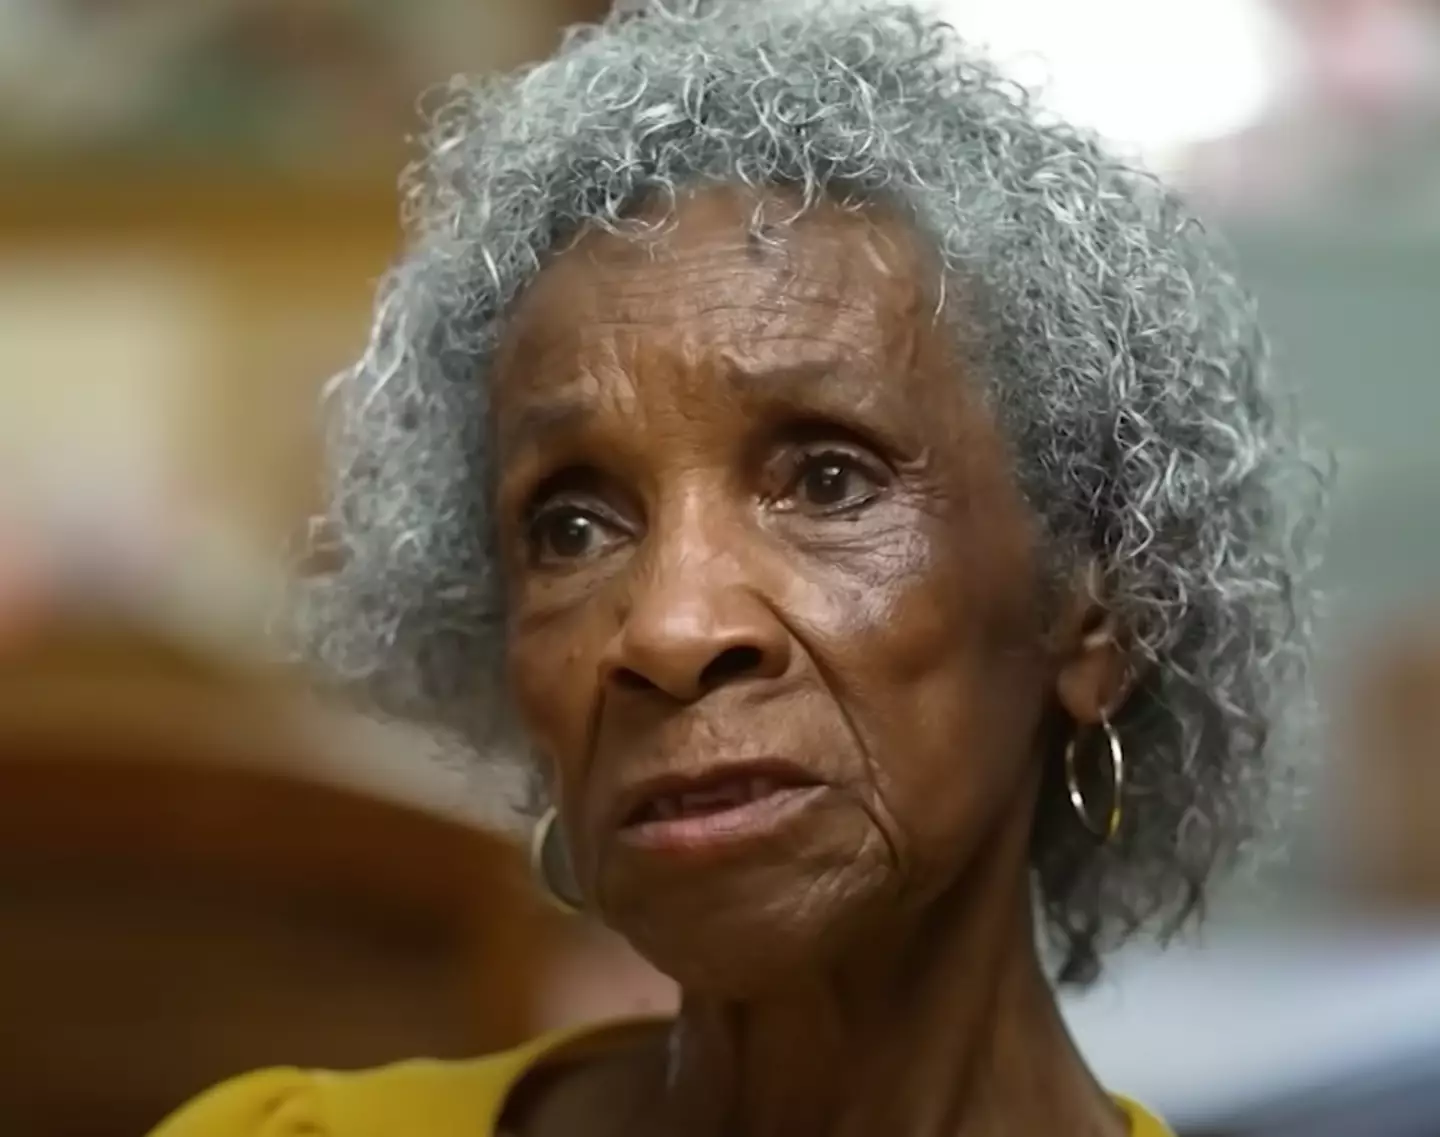 Josephine Wright has lived in the home for 30 years.